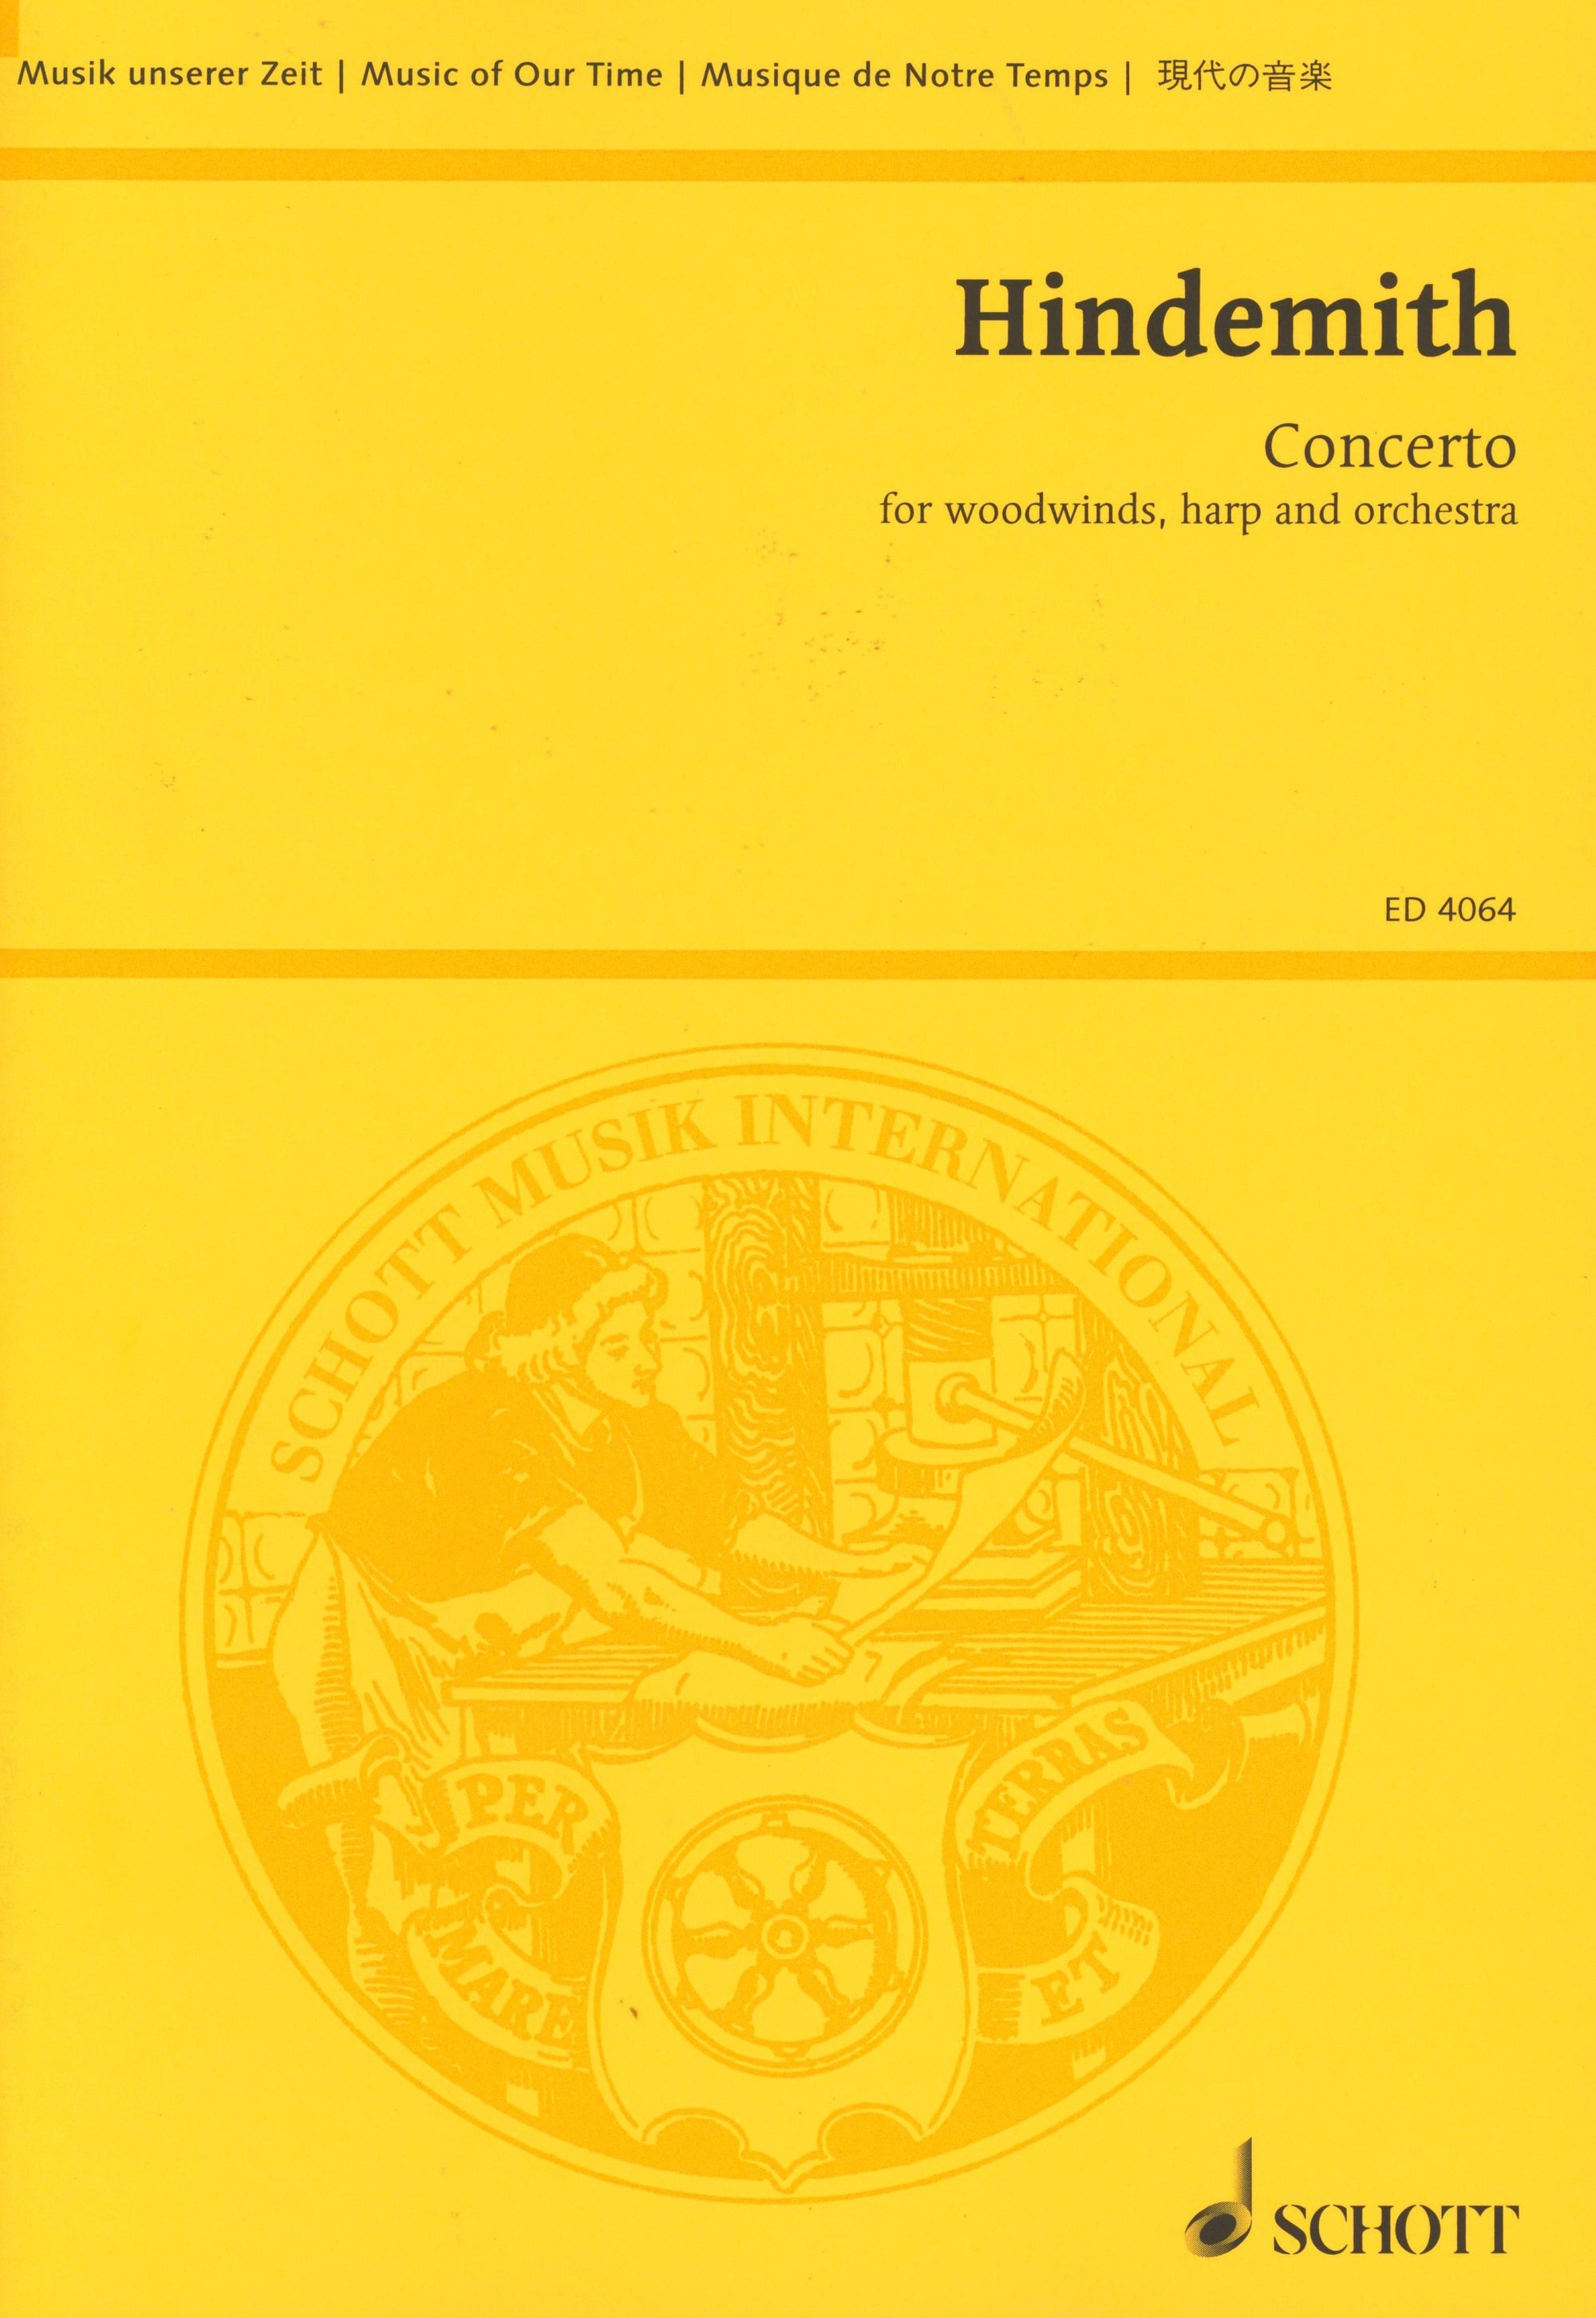 Hindemith: Concerto for Woodwinds & Harp